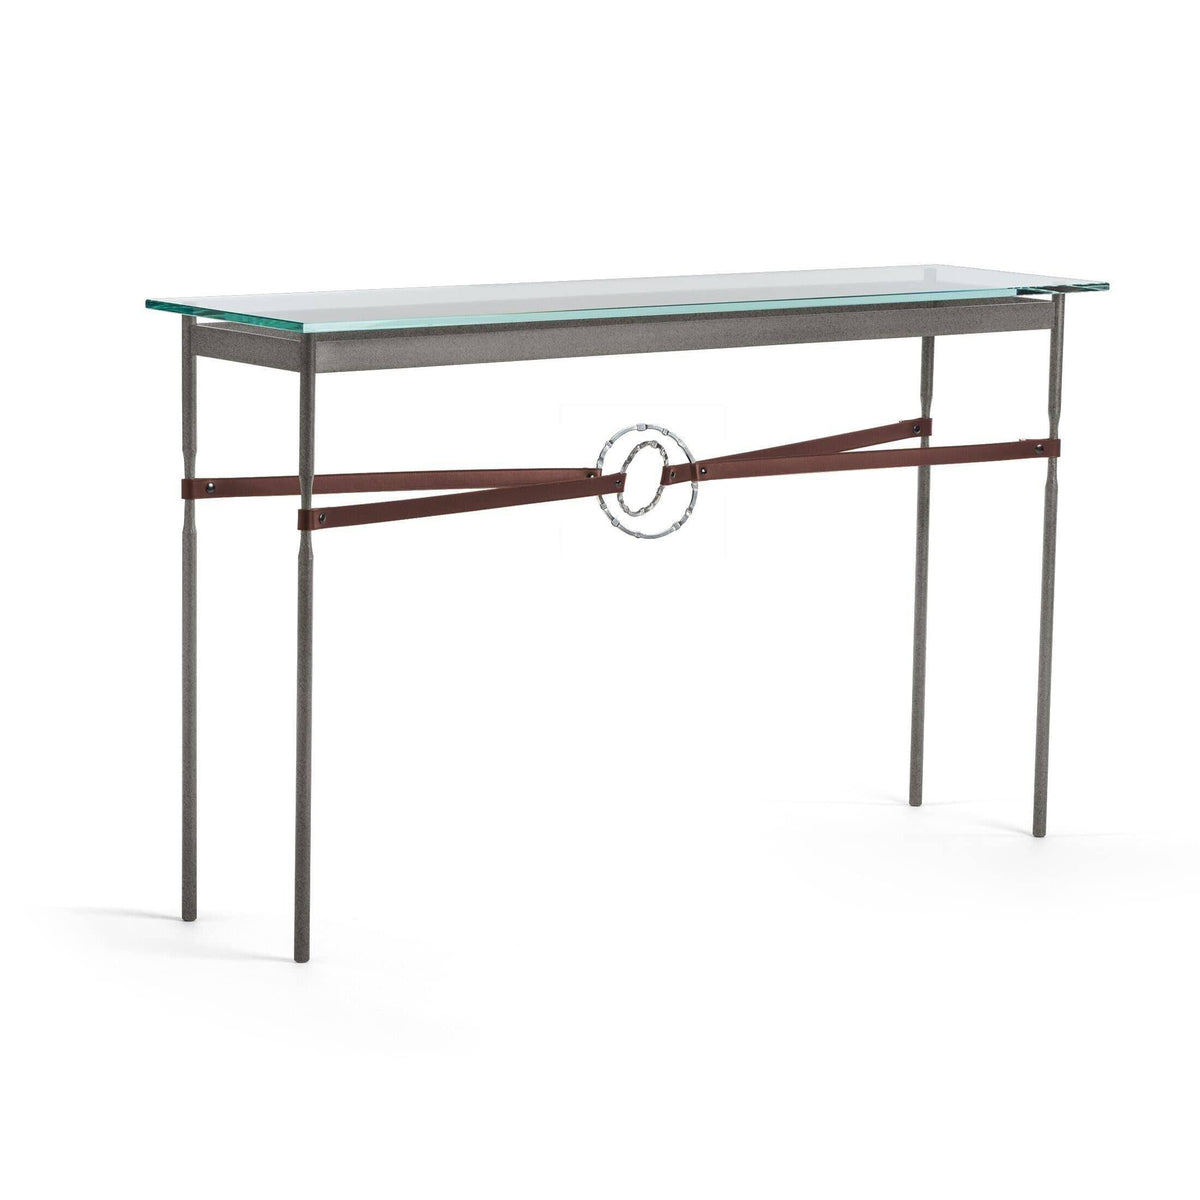 Hubbardton Forge - Equus Brown Leather Console Table - 750118-20-85-LB-VA0714 | Montreal Lighting & Hardware